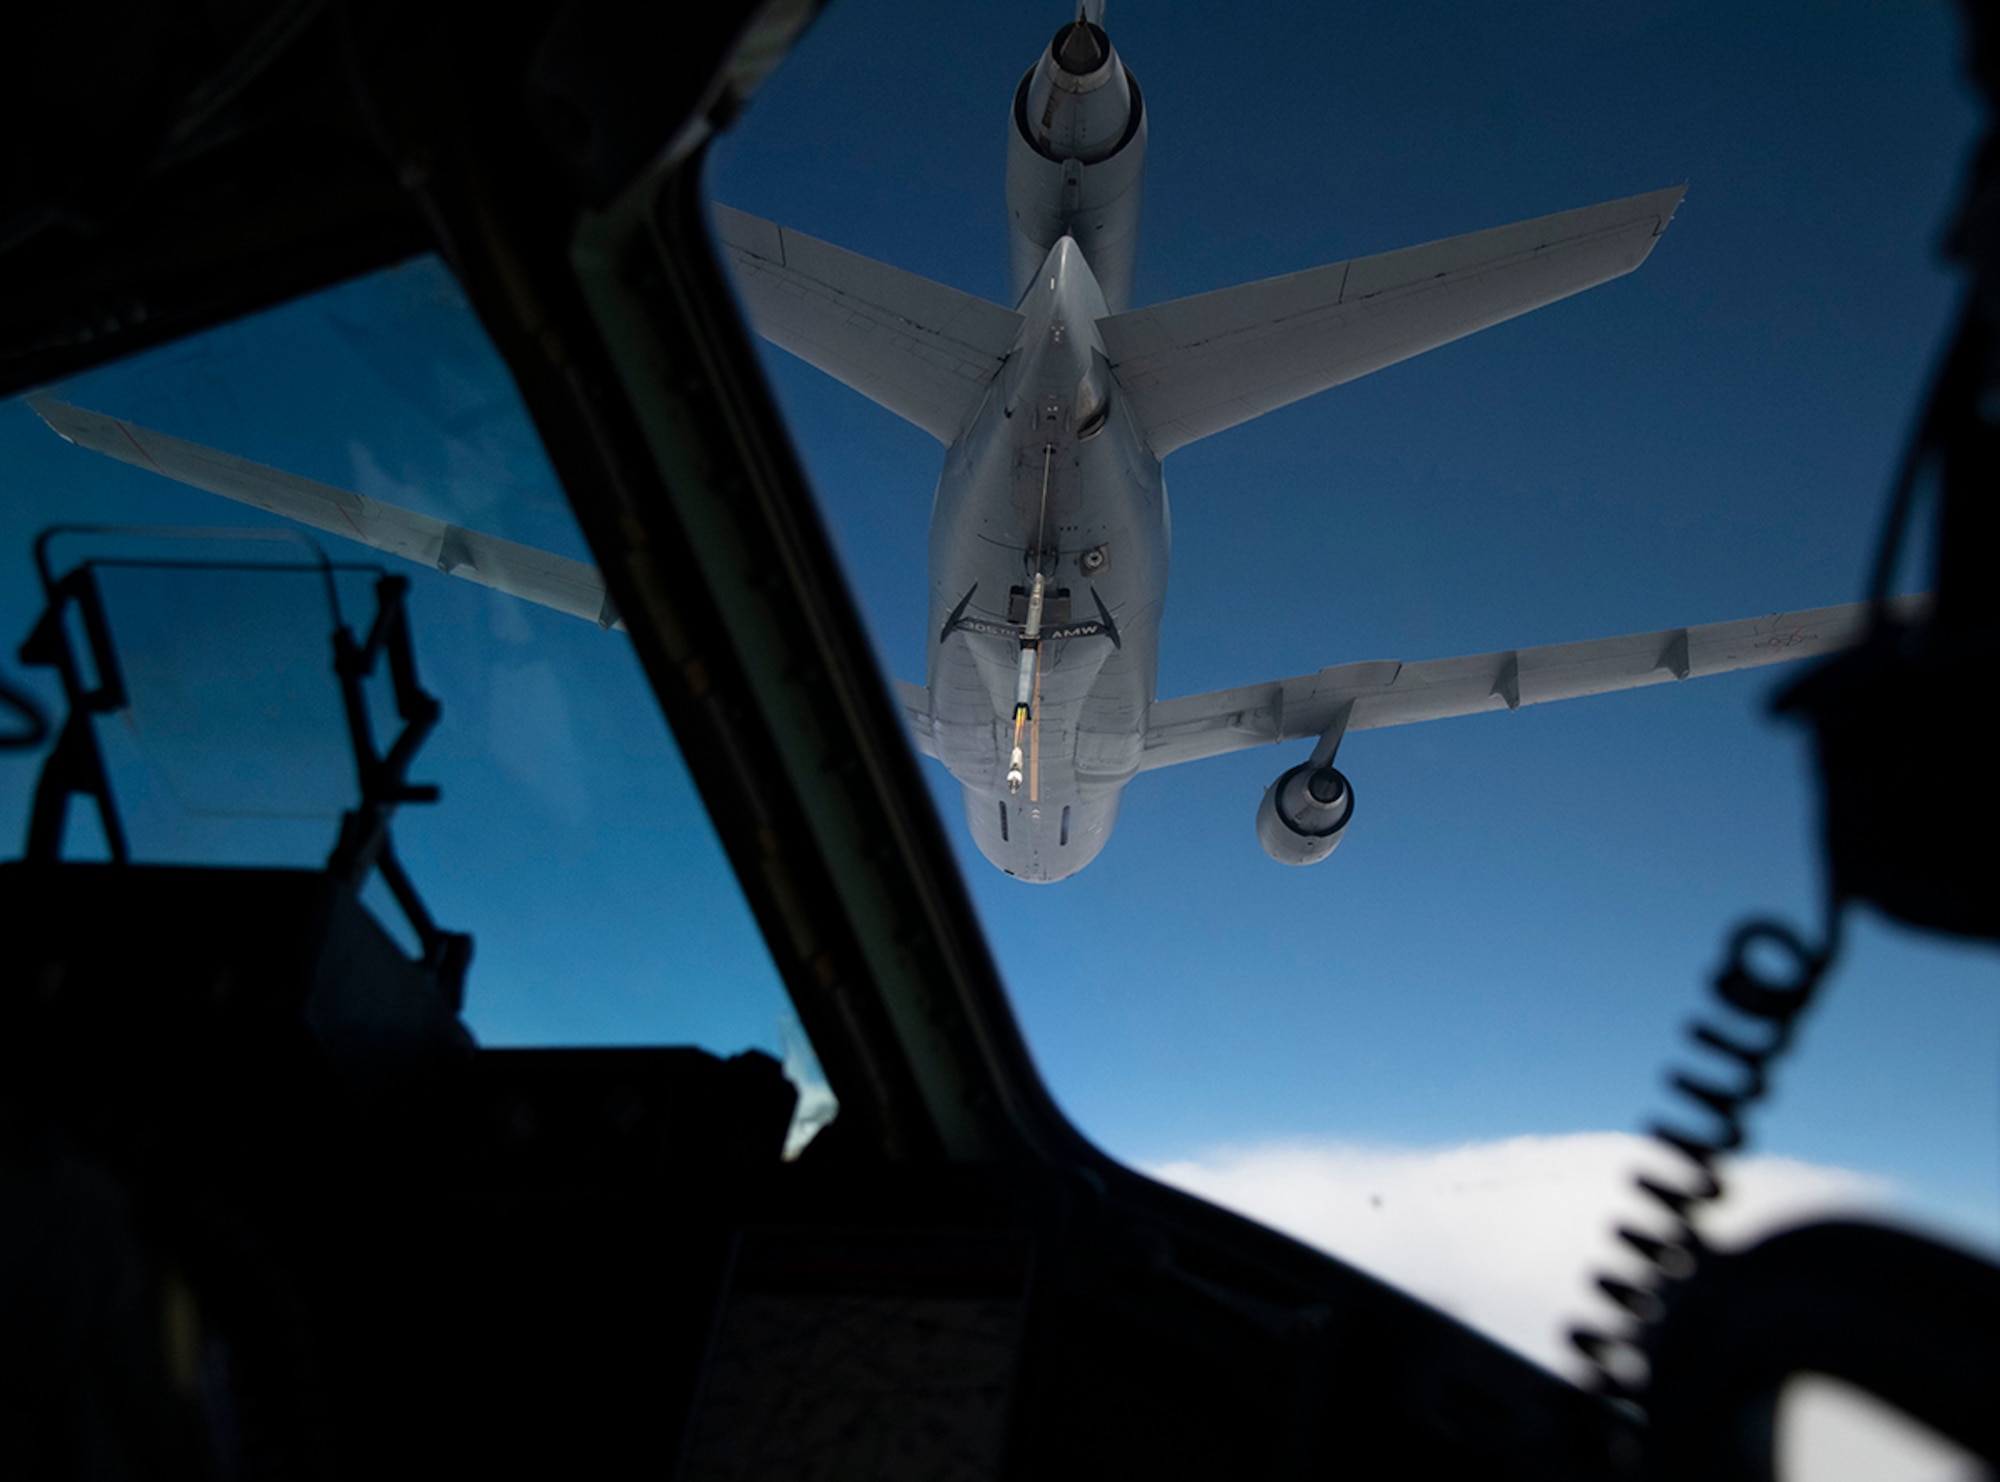 A KC-10 Extender with the 305th Air Mobility Wing from Joint Base McGuire-Dix-Lakehurst, N.J., prepares to refuel a C-17 Globemaster III during Exercise Jersey Devil 19, March 4, 2019. Aircraft from Dover Air Force Base, Del., and Joint Base MDL participated in the exercise to include the C-5M Supergalaxy, KC-10 Extender and C-17 Globemaster III. (U.S. Air Force photo by Airman 1st Class Zoe M. Wockenfuss)